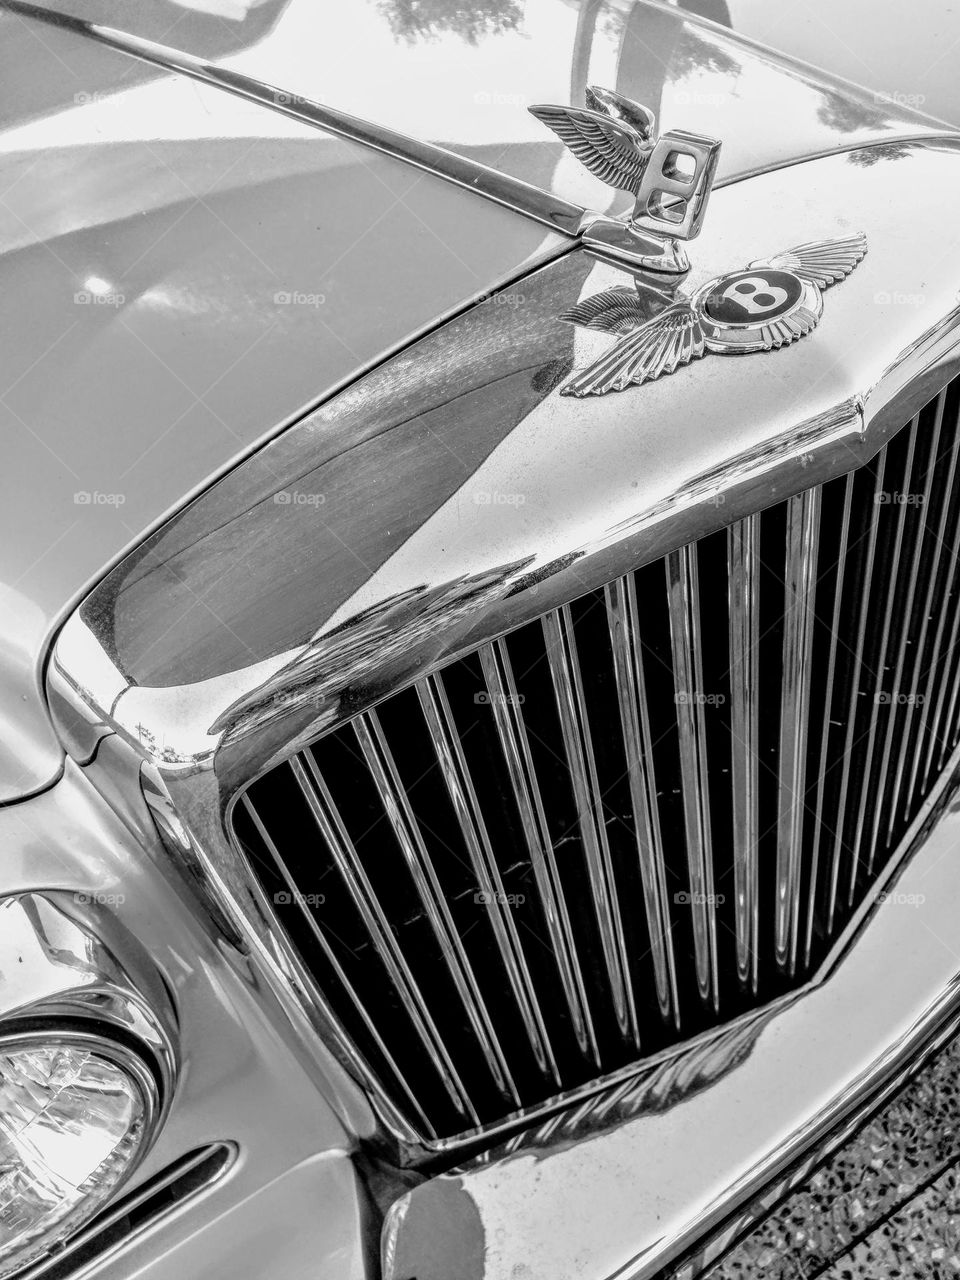 Classic luxury car the Bentley with its winged "B" badge proudly displayed on the bonnet.